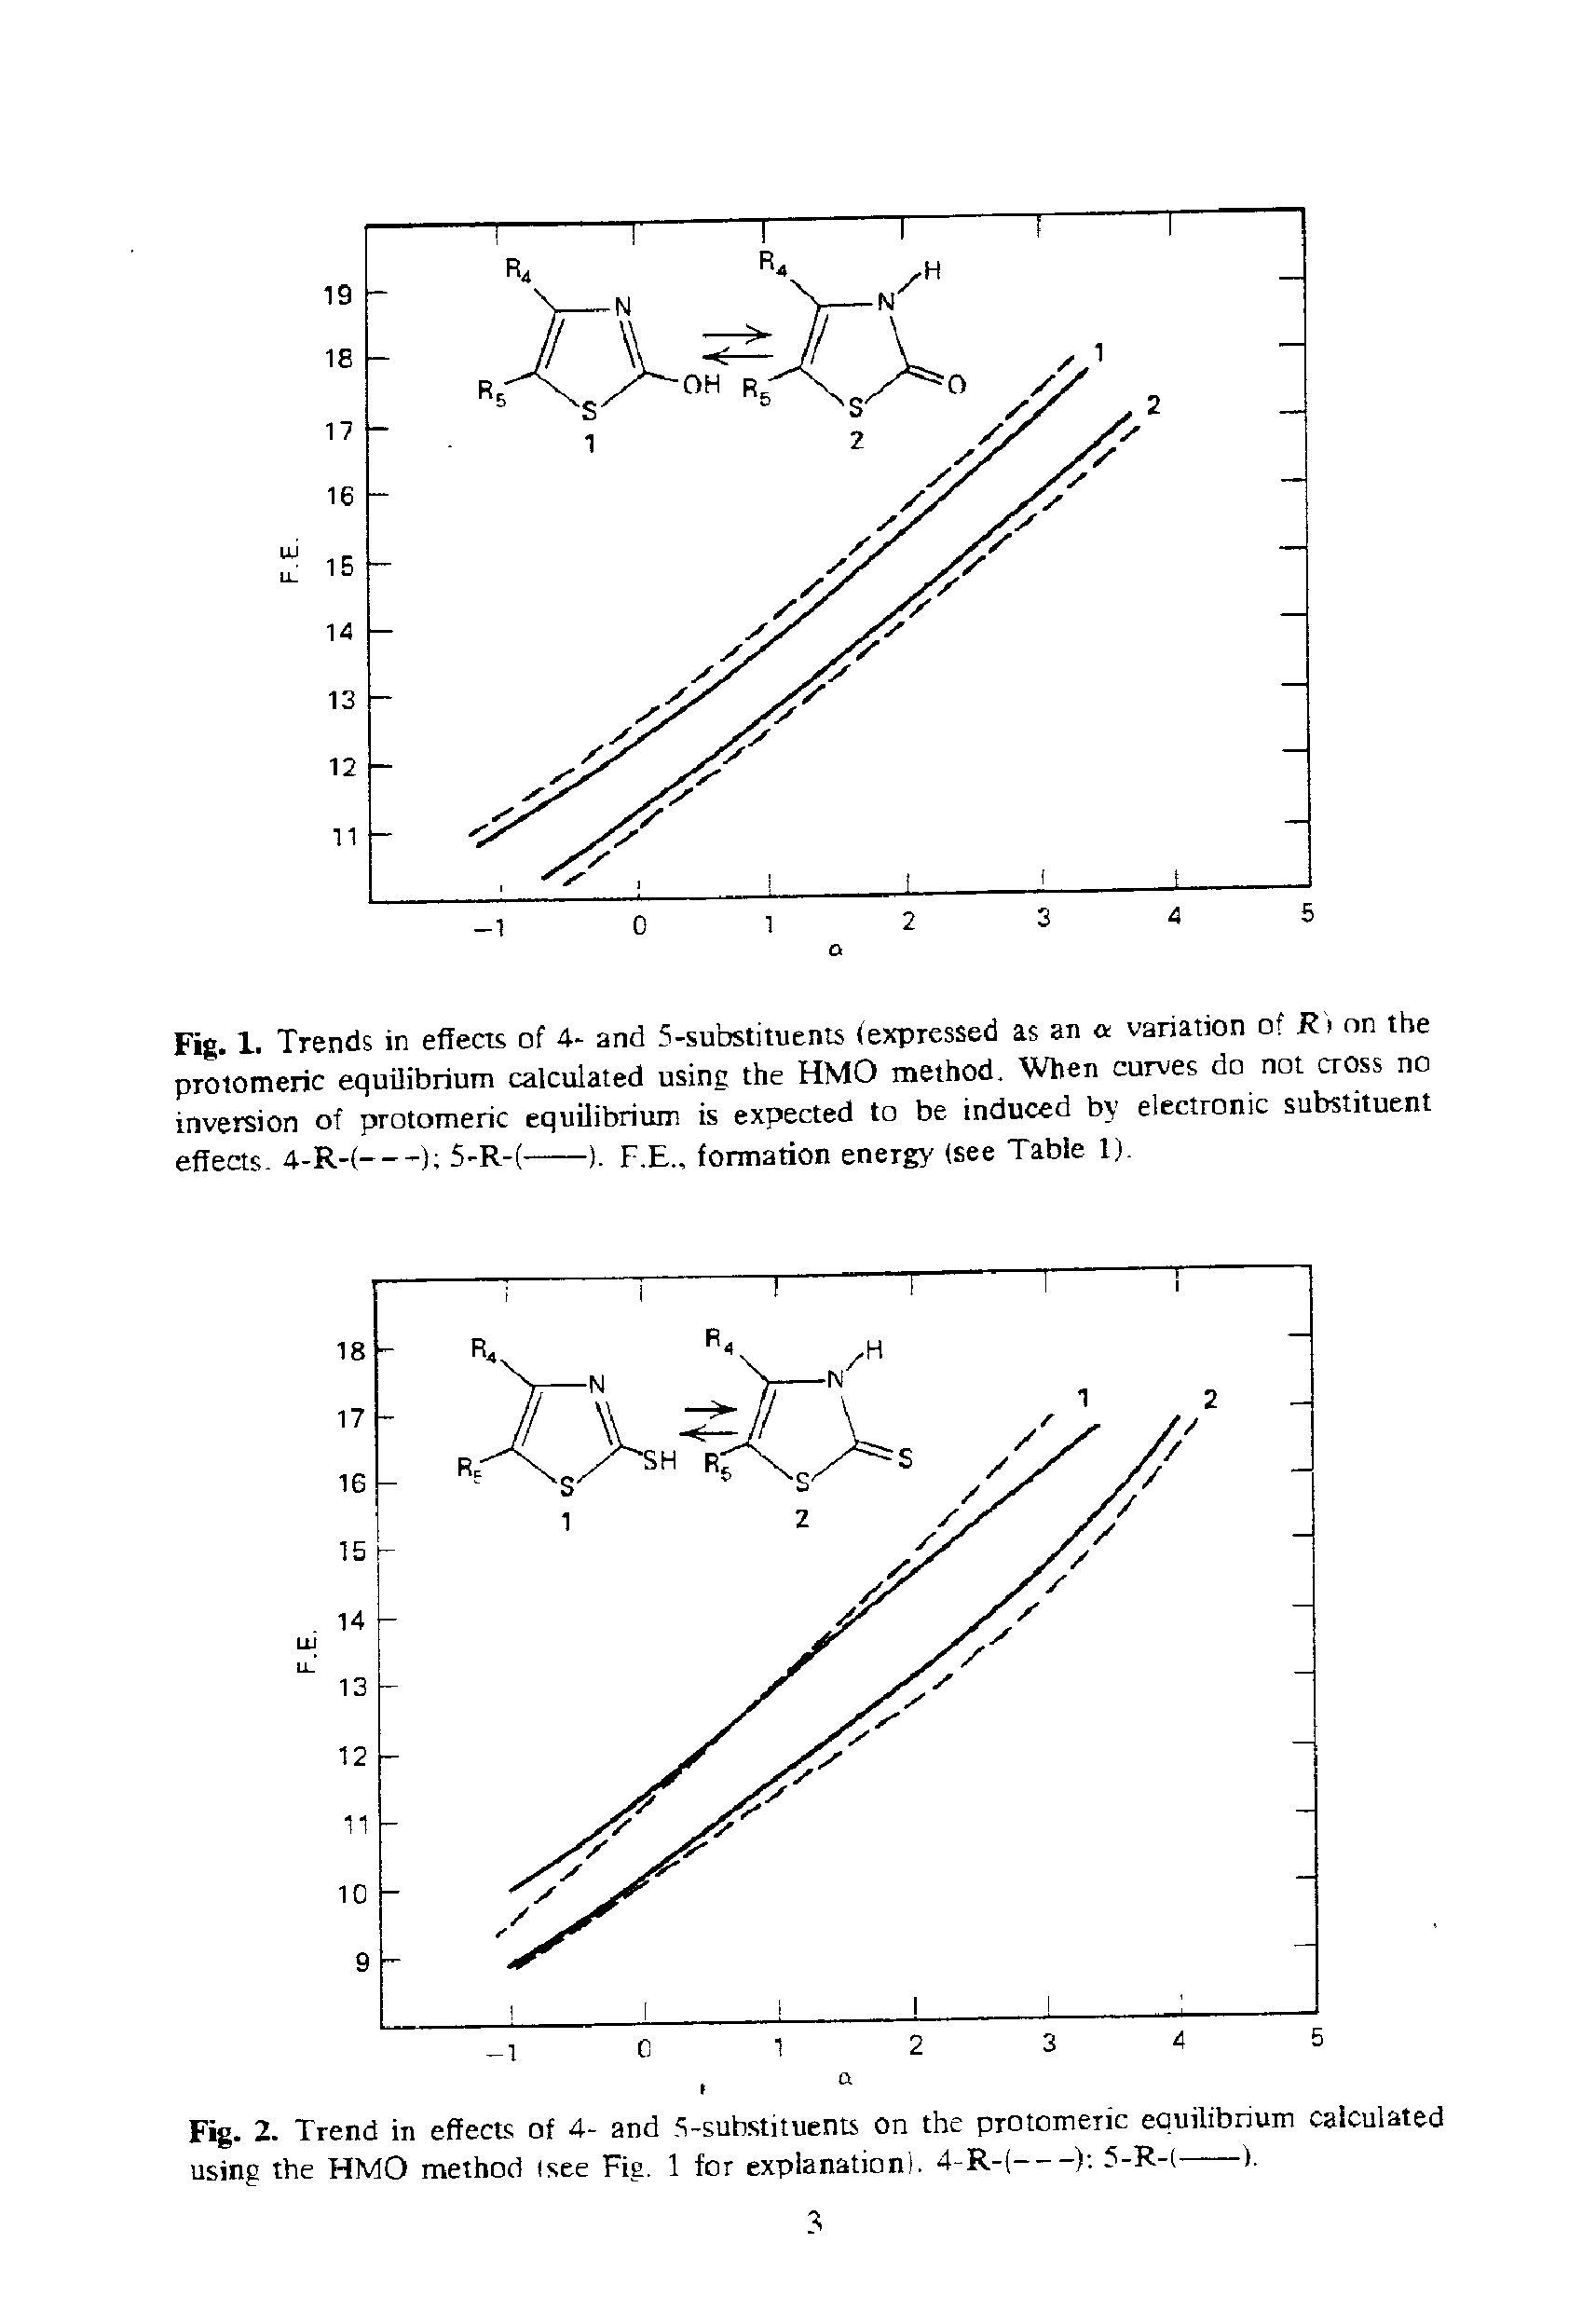 Fig. 1. Trends in effects of 4- and 5-substituenls (expressed as an a variation of R) on the proiomeric equilibrium calculated using the HMO method. When curves do not cross no inversion of protomeric equilibrium is expected to be induced by electronic substituent effects, 4-R-(----) 5-R-(-----). F,E formation energy (see Table 1).